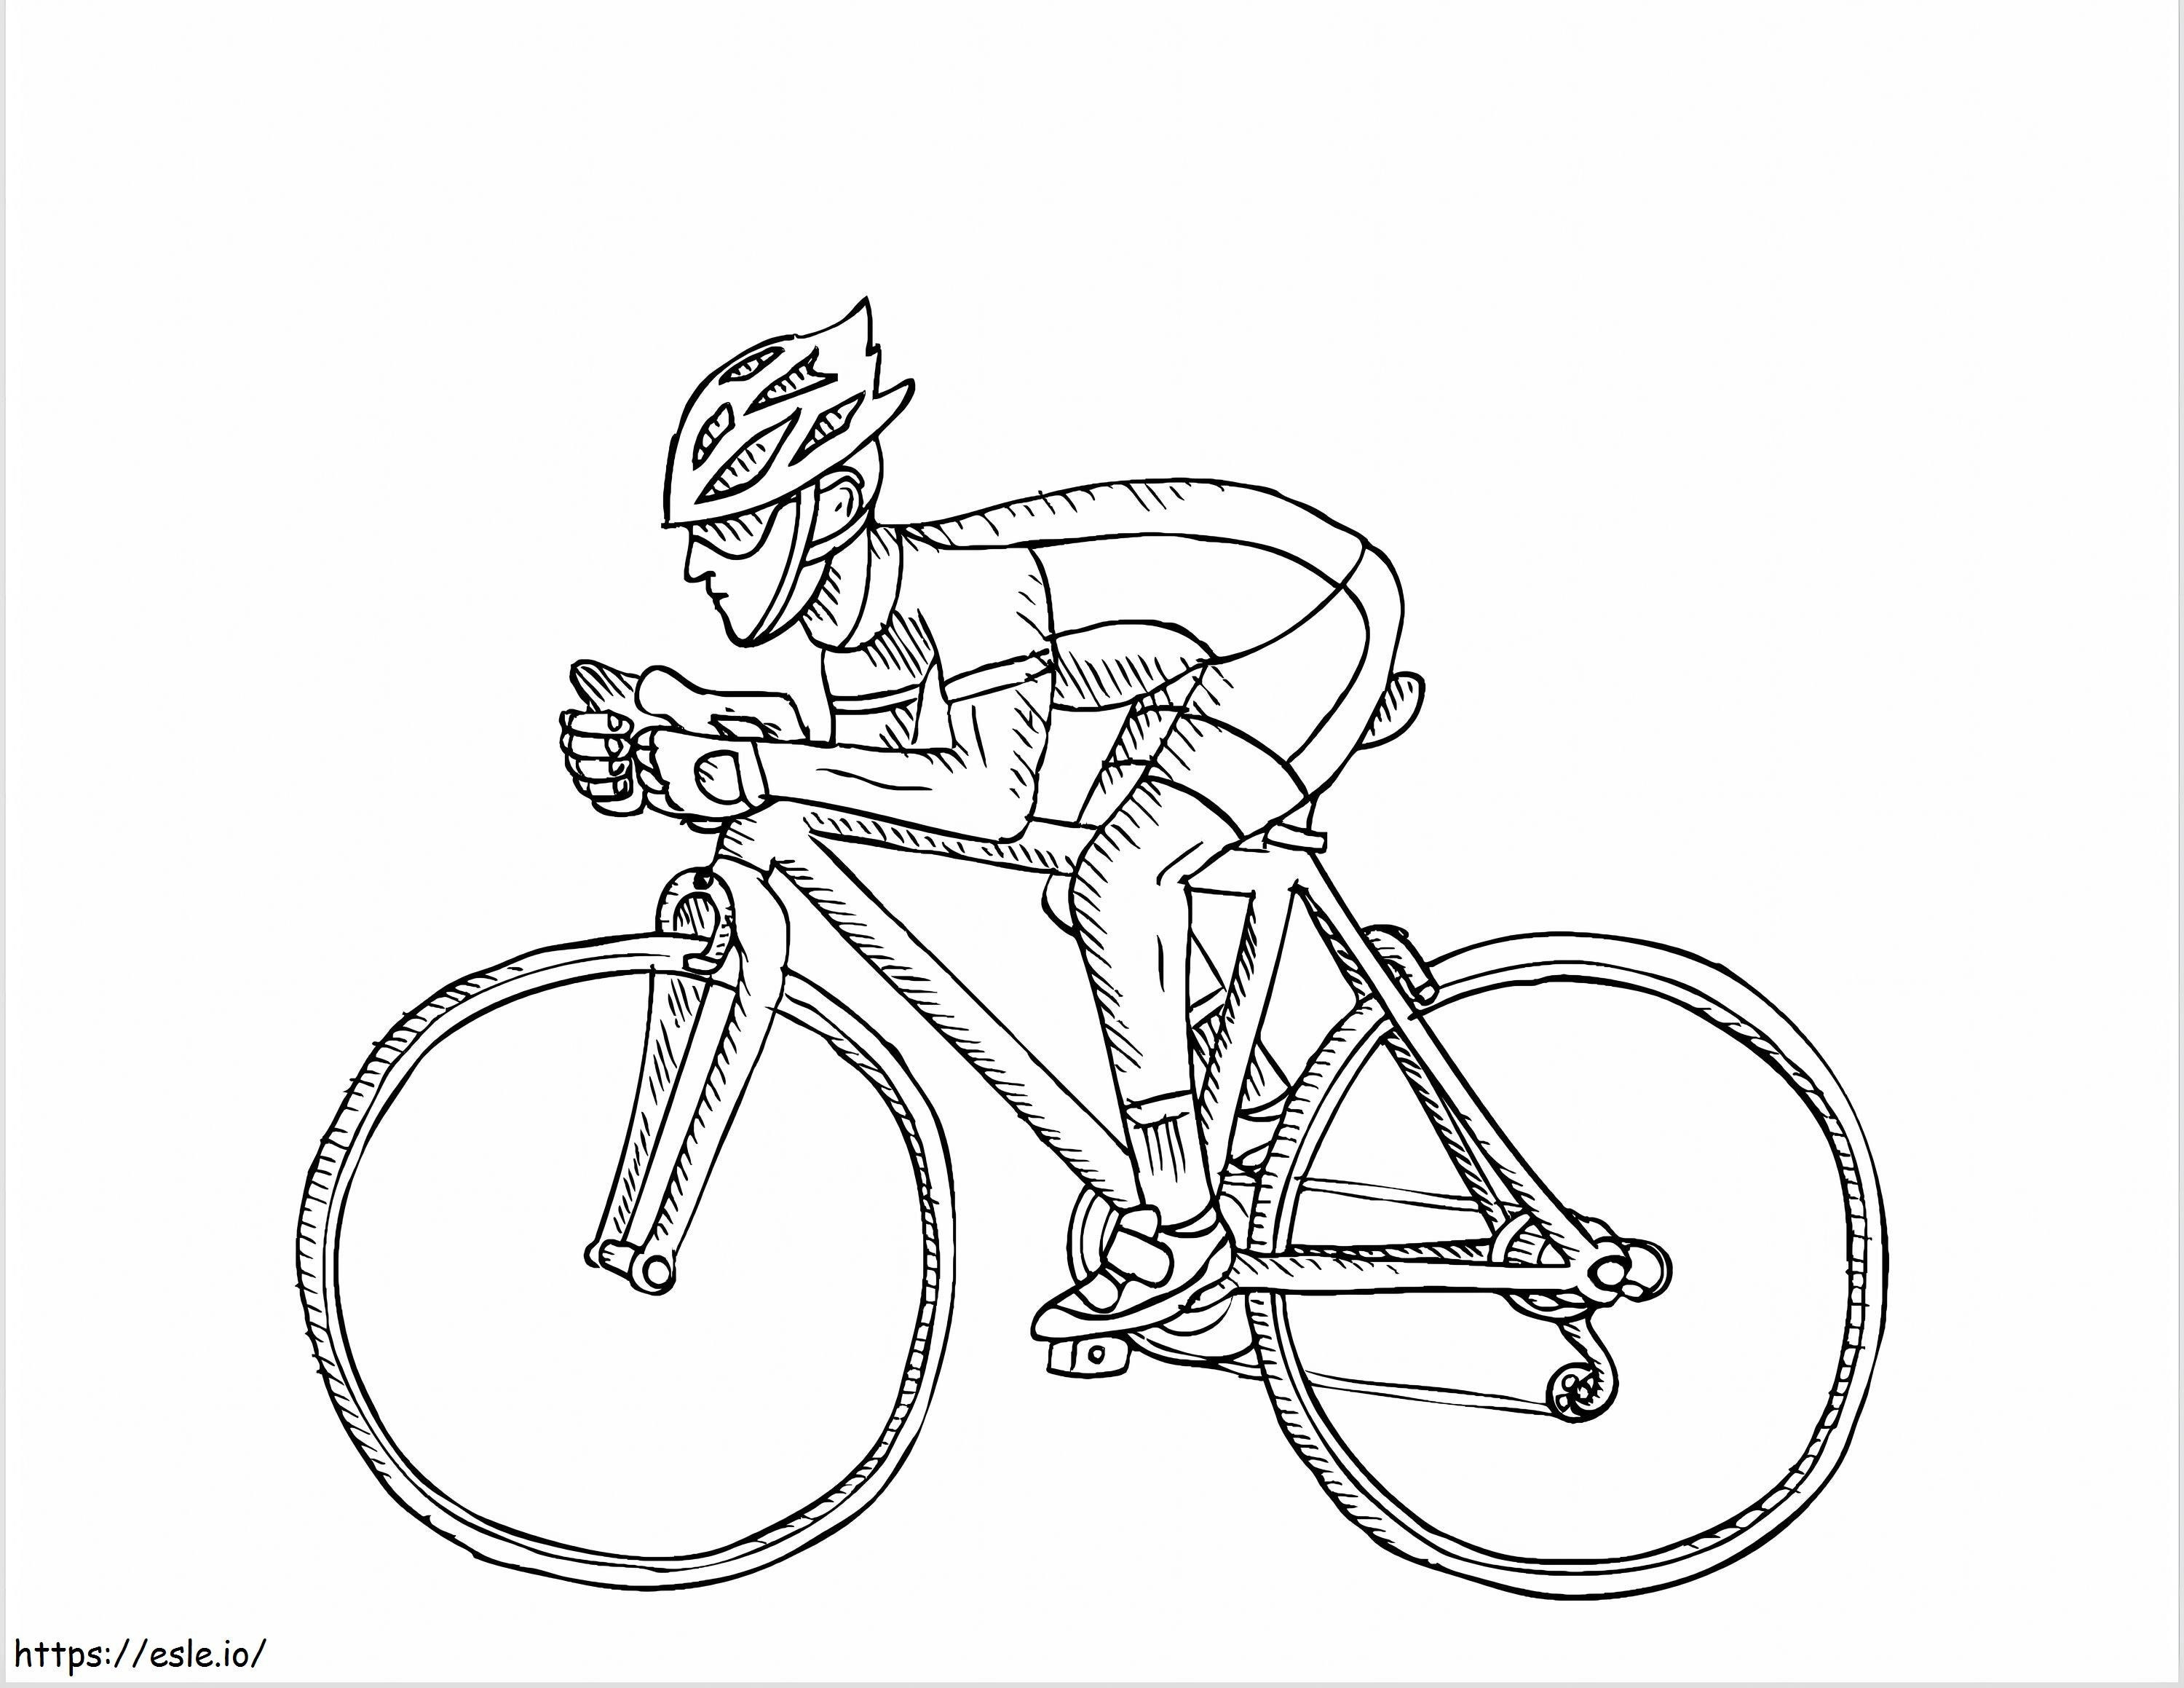 Track Cycling coloring page